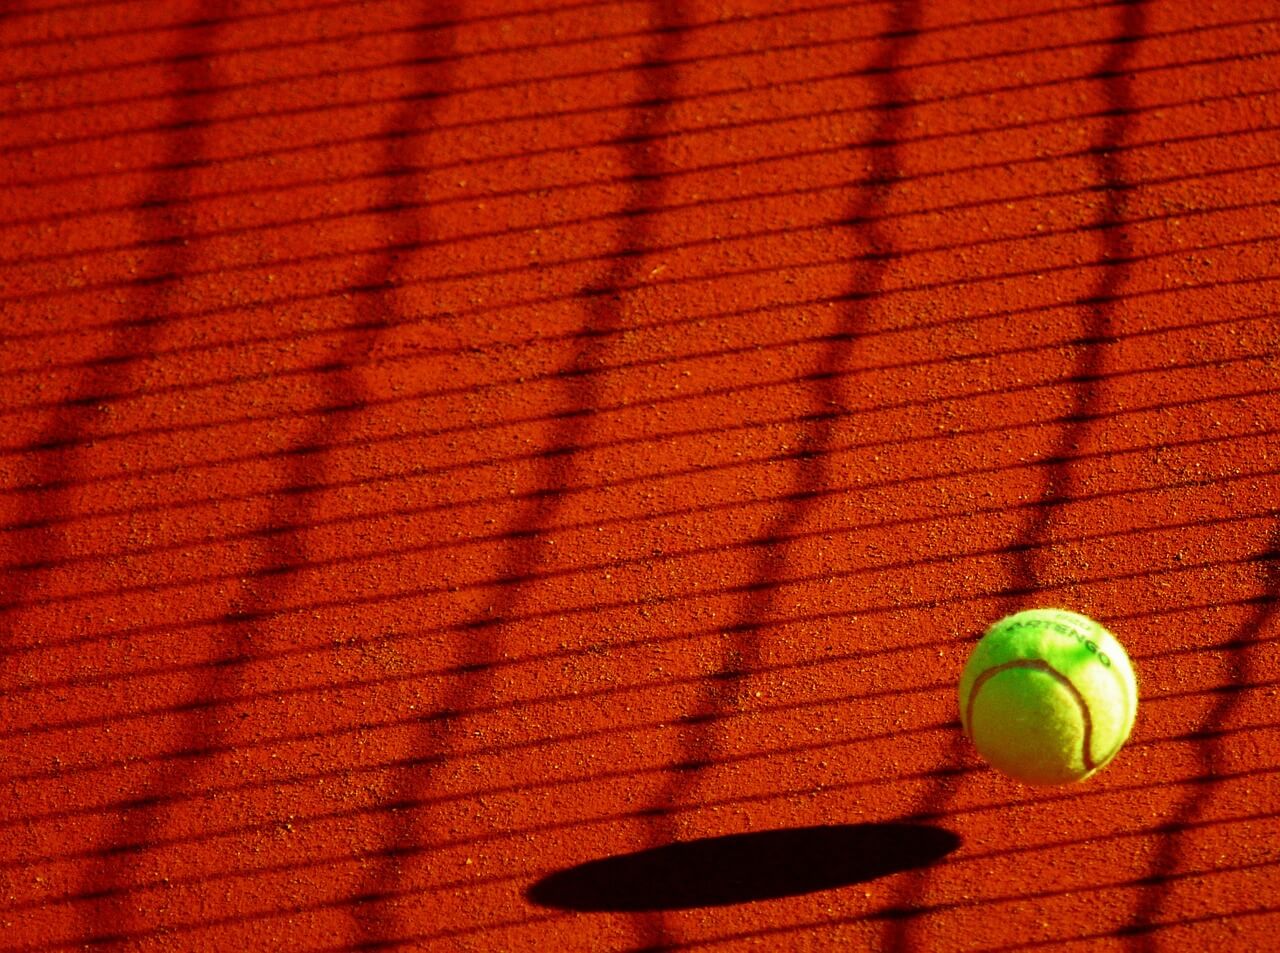 Pro Tennis Player Sues for Injuries in Slip-and-Fall